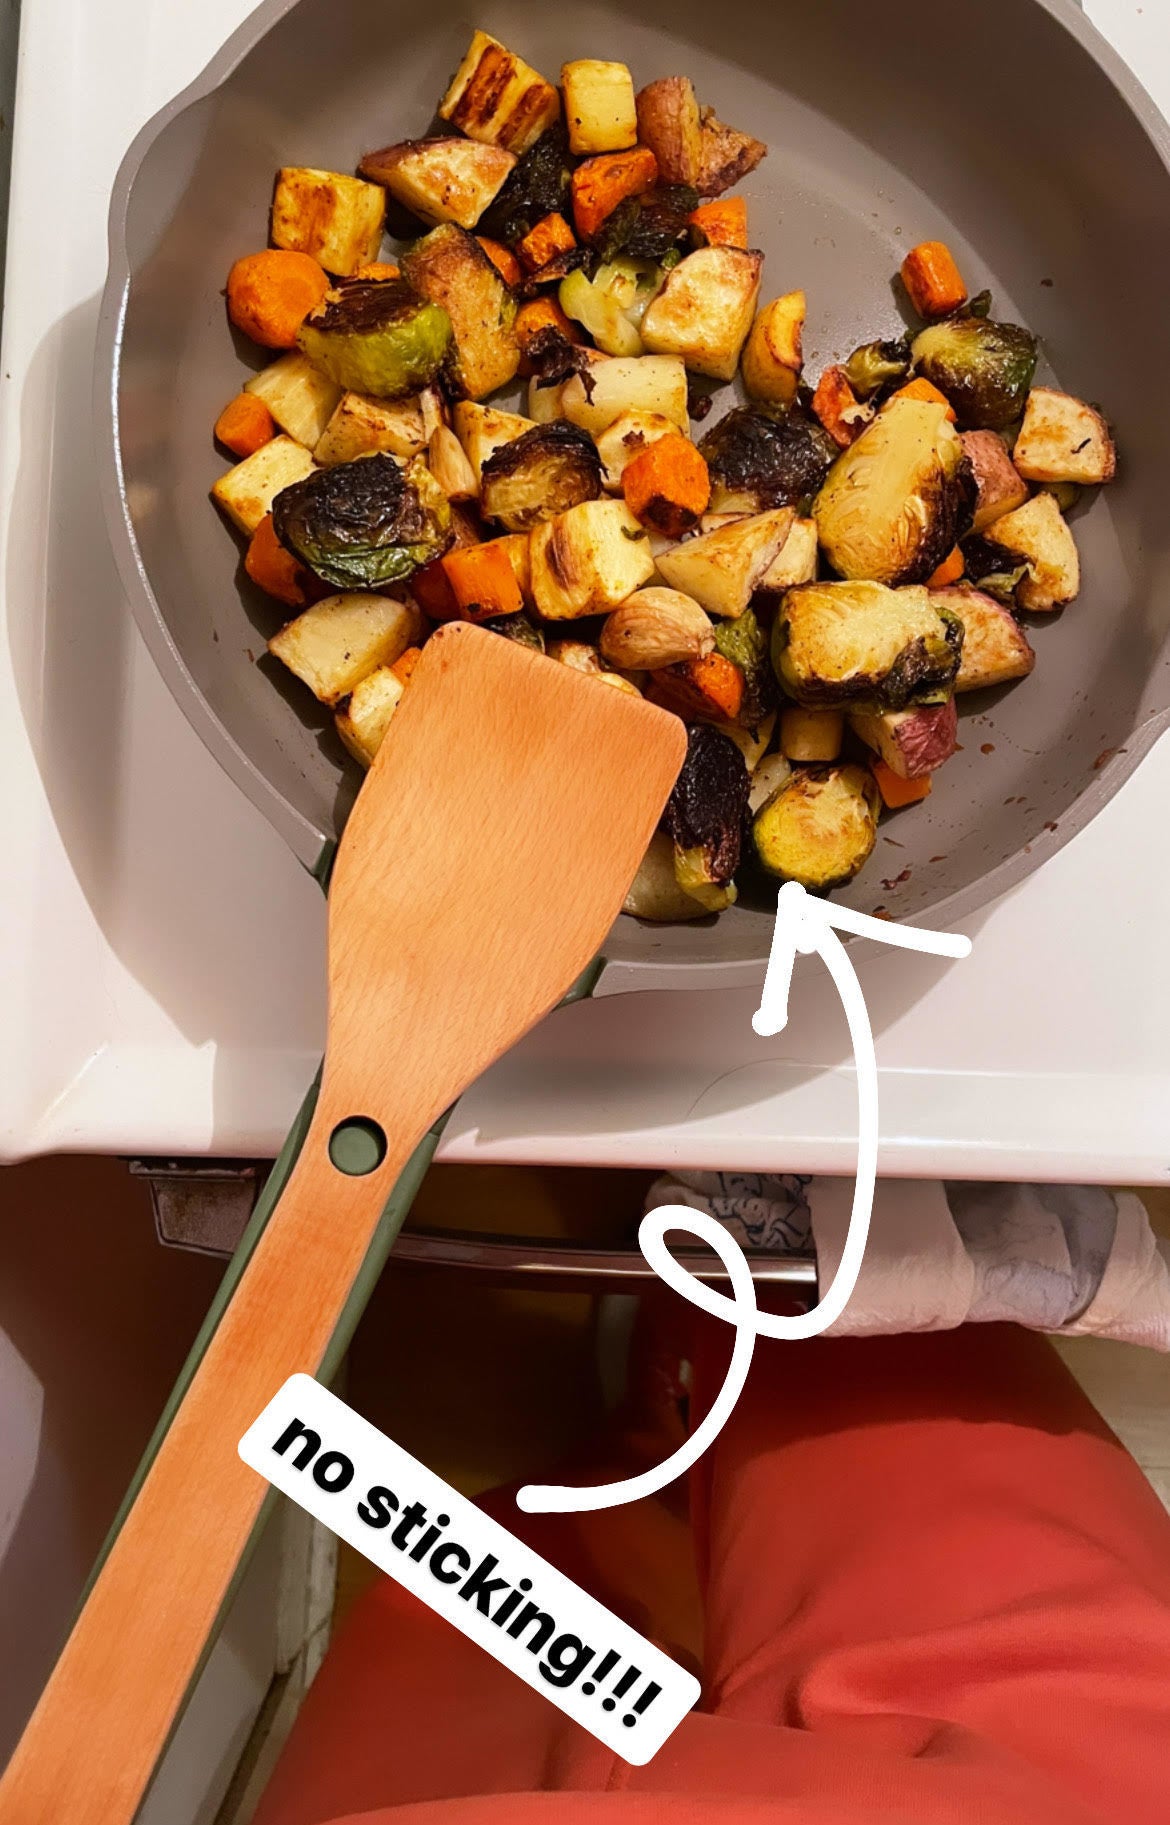 A bunch of veggies not sticking to the pan while it is sitting on a stove